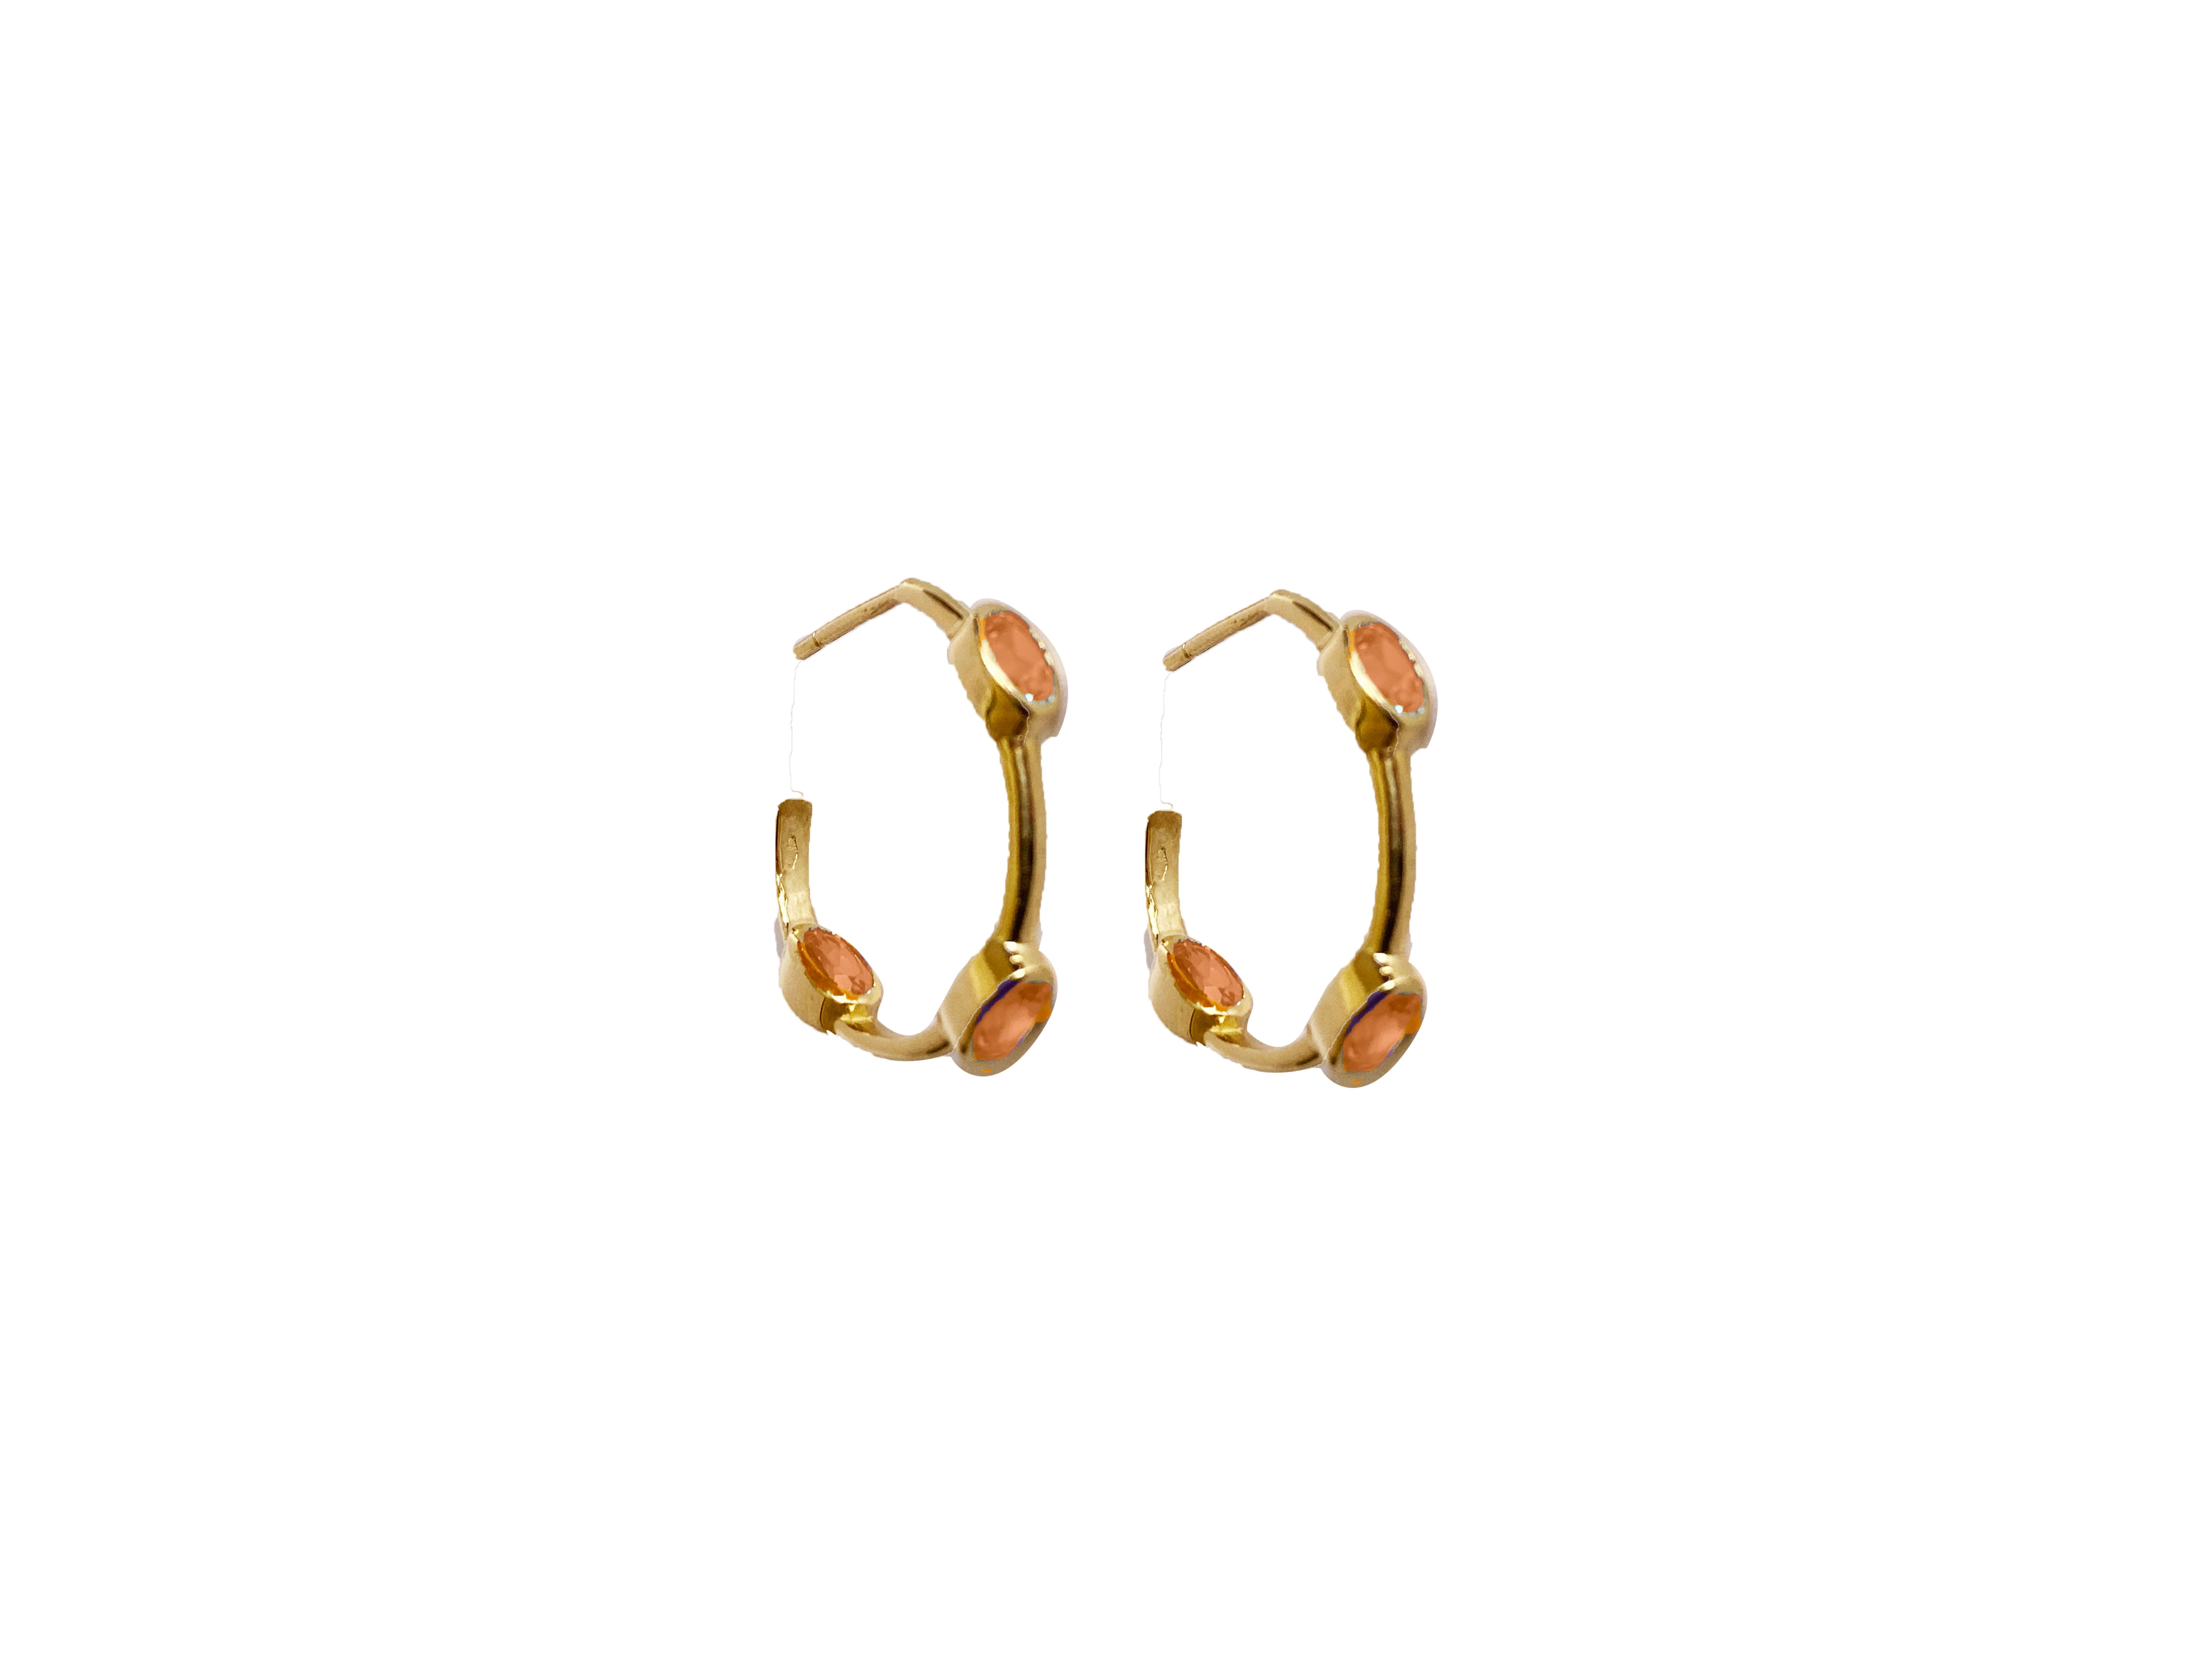 Rossella Ugolini Unisex Citrine Hoop Earrings 18K Yellow Gold Made In Italy For Sale 5